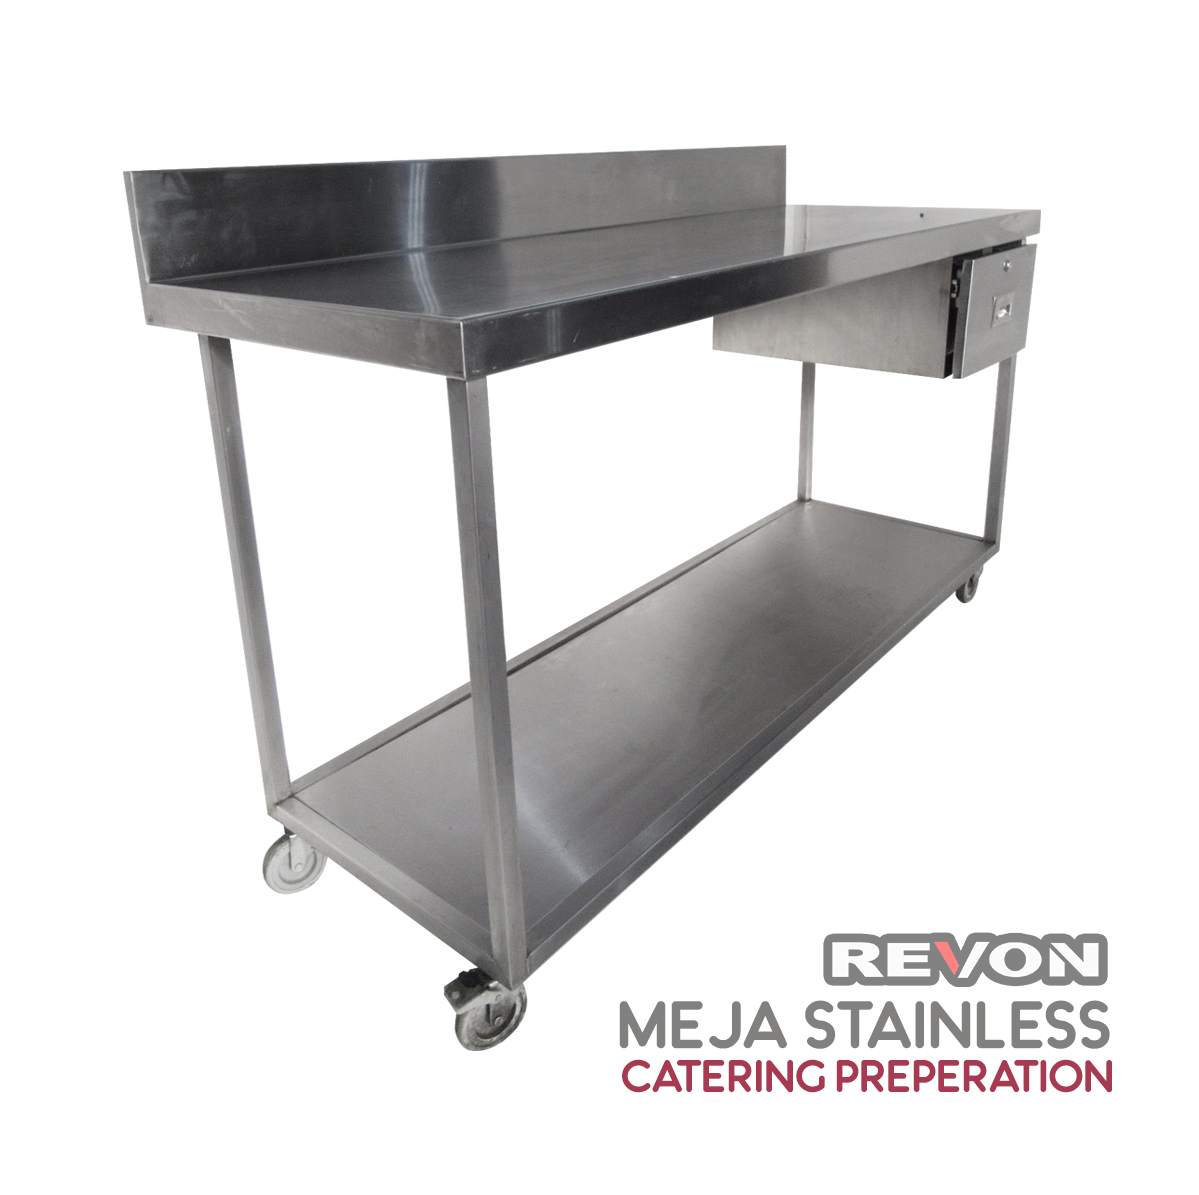  Meja  Stainless  Steel  Catering Preperation